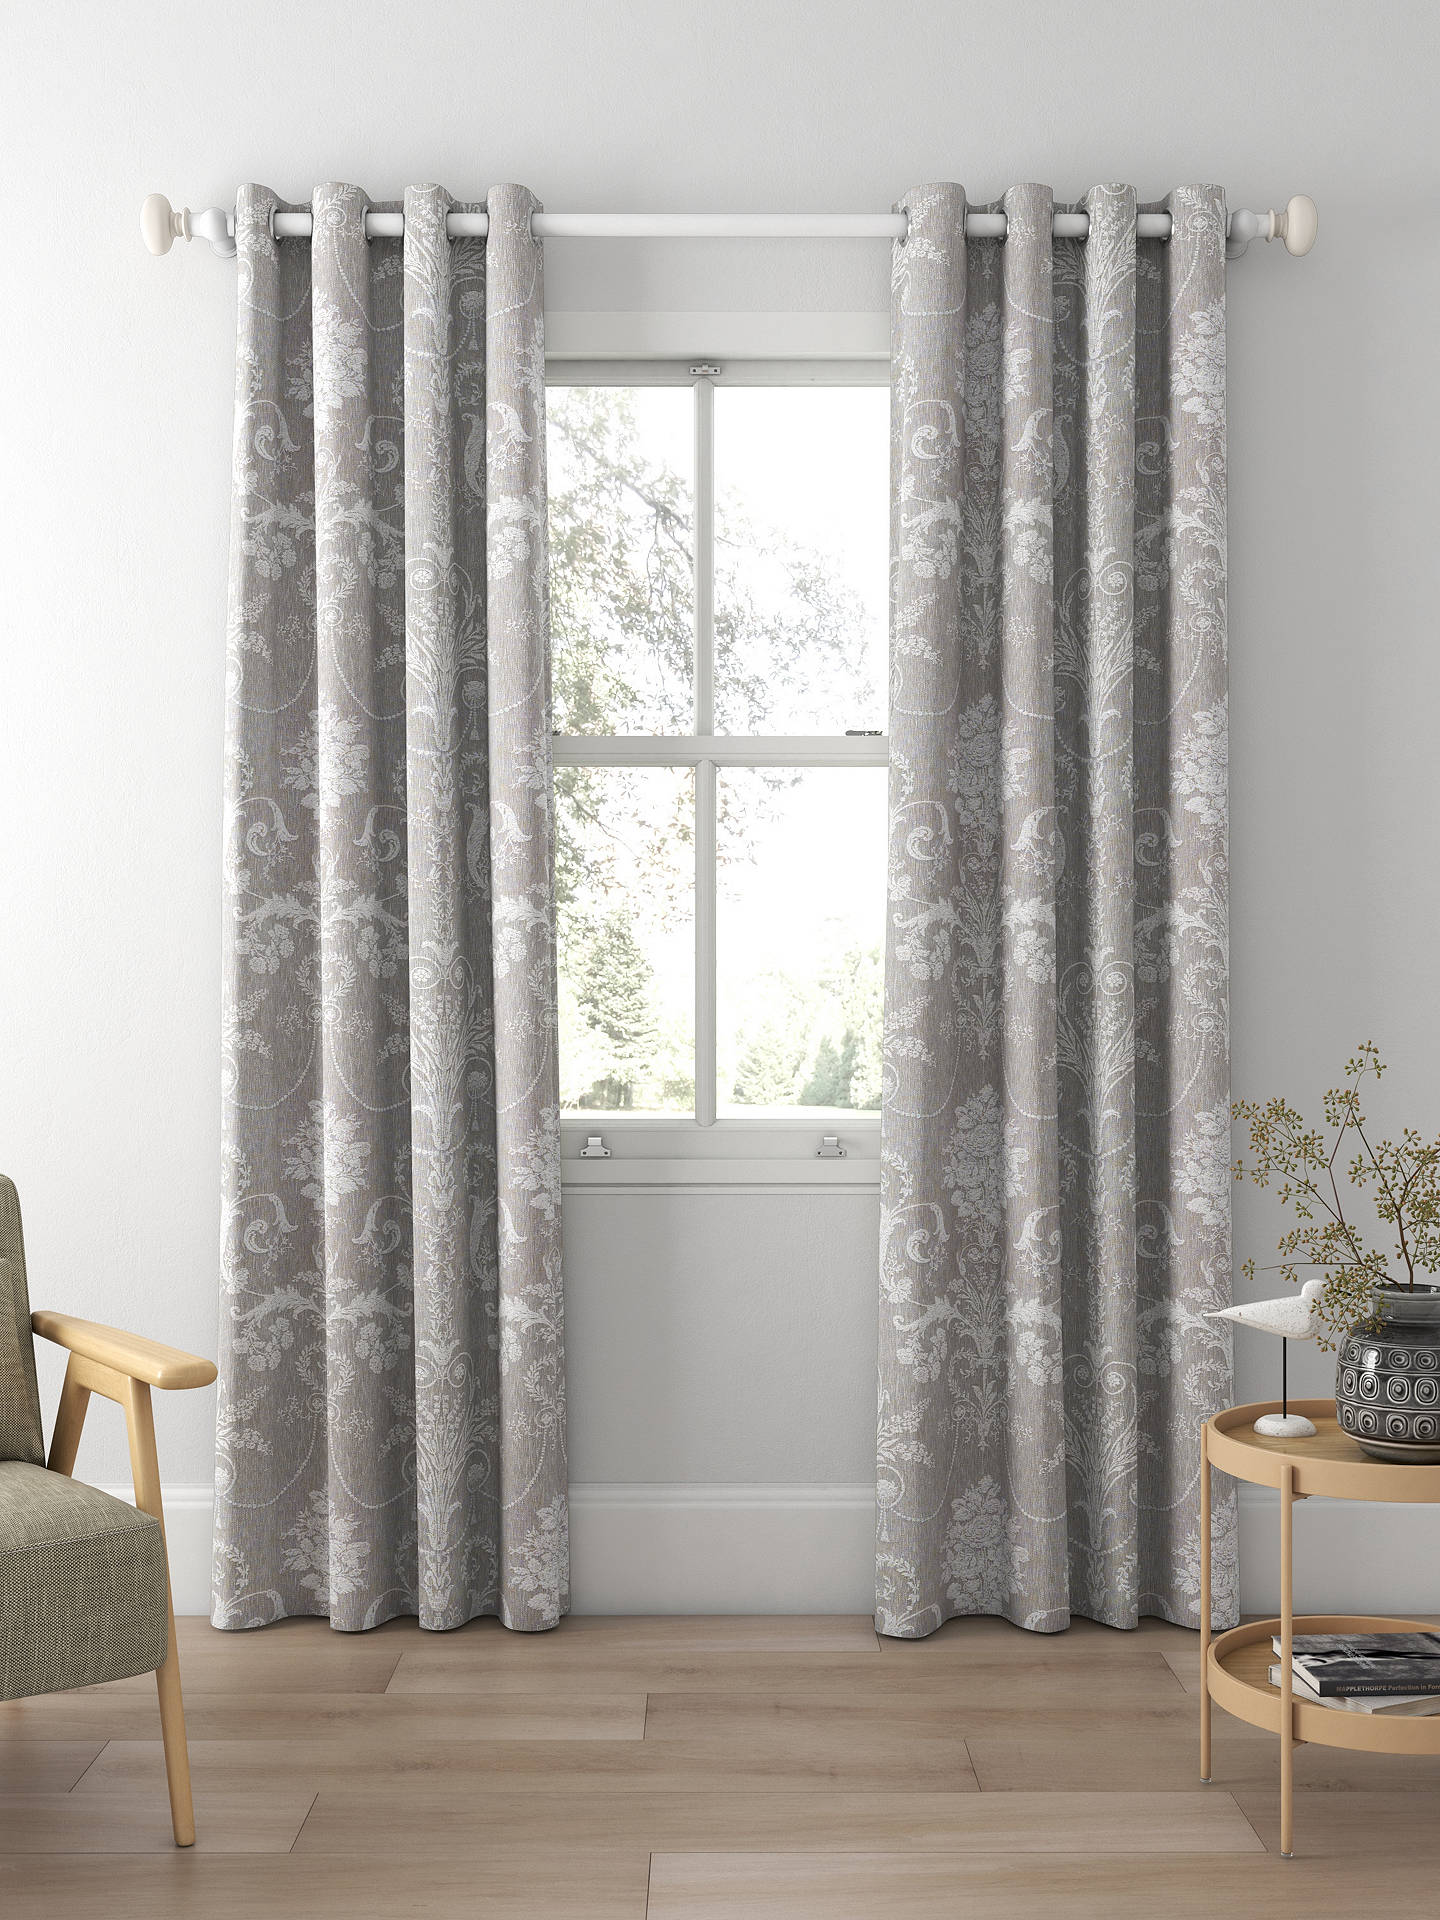 Laura Ashley Josette Woven Made to Measure Curtains, Steel